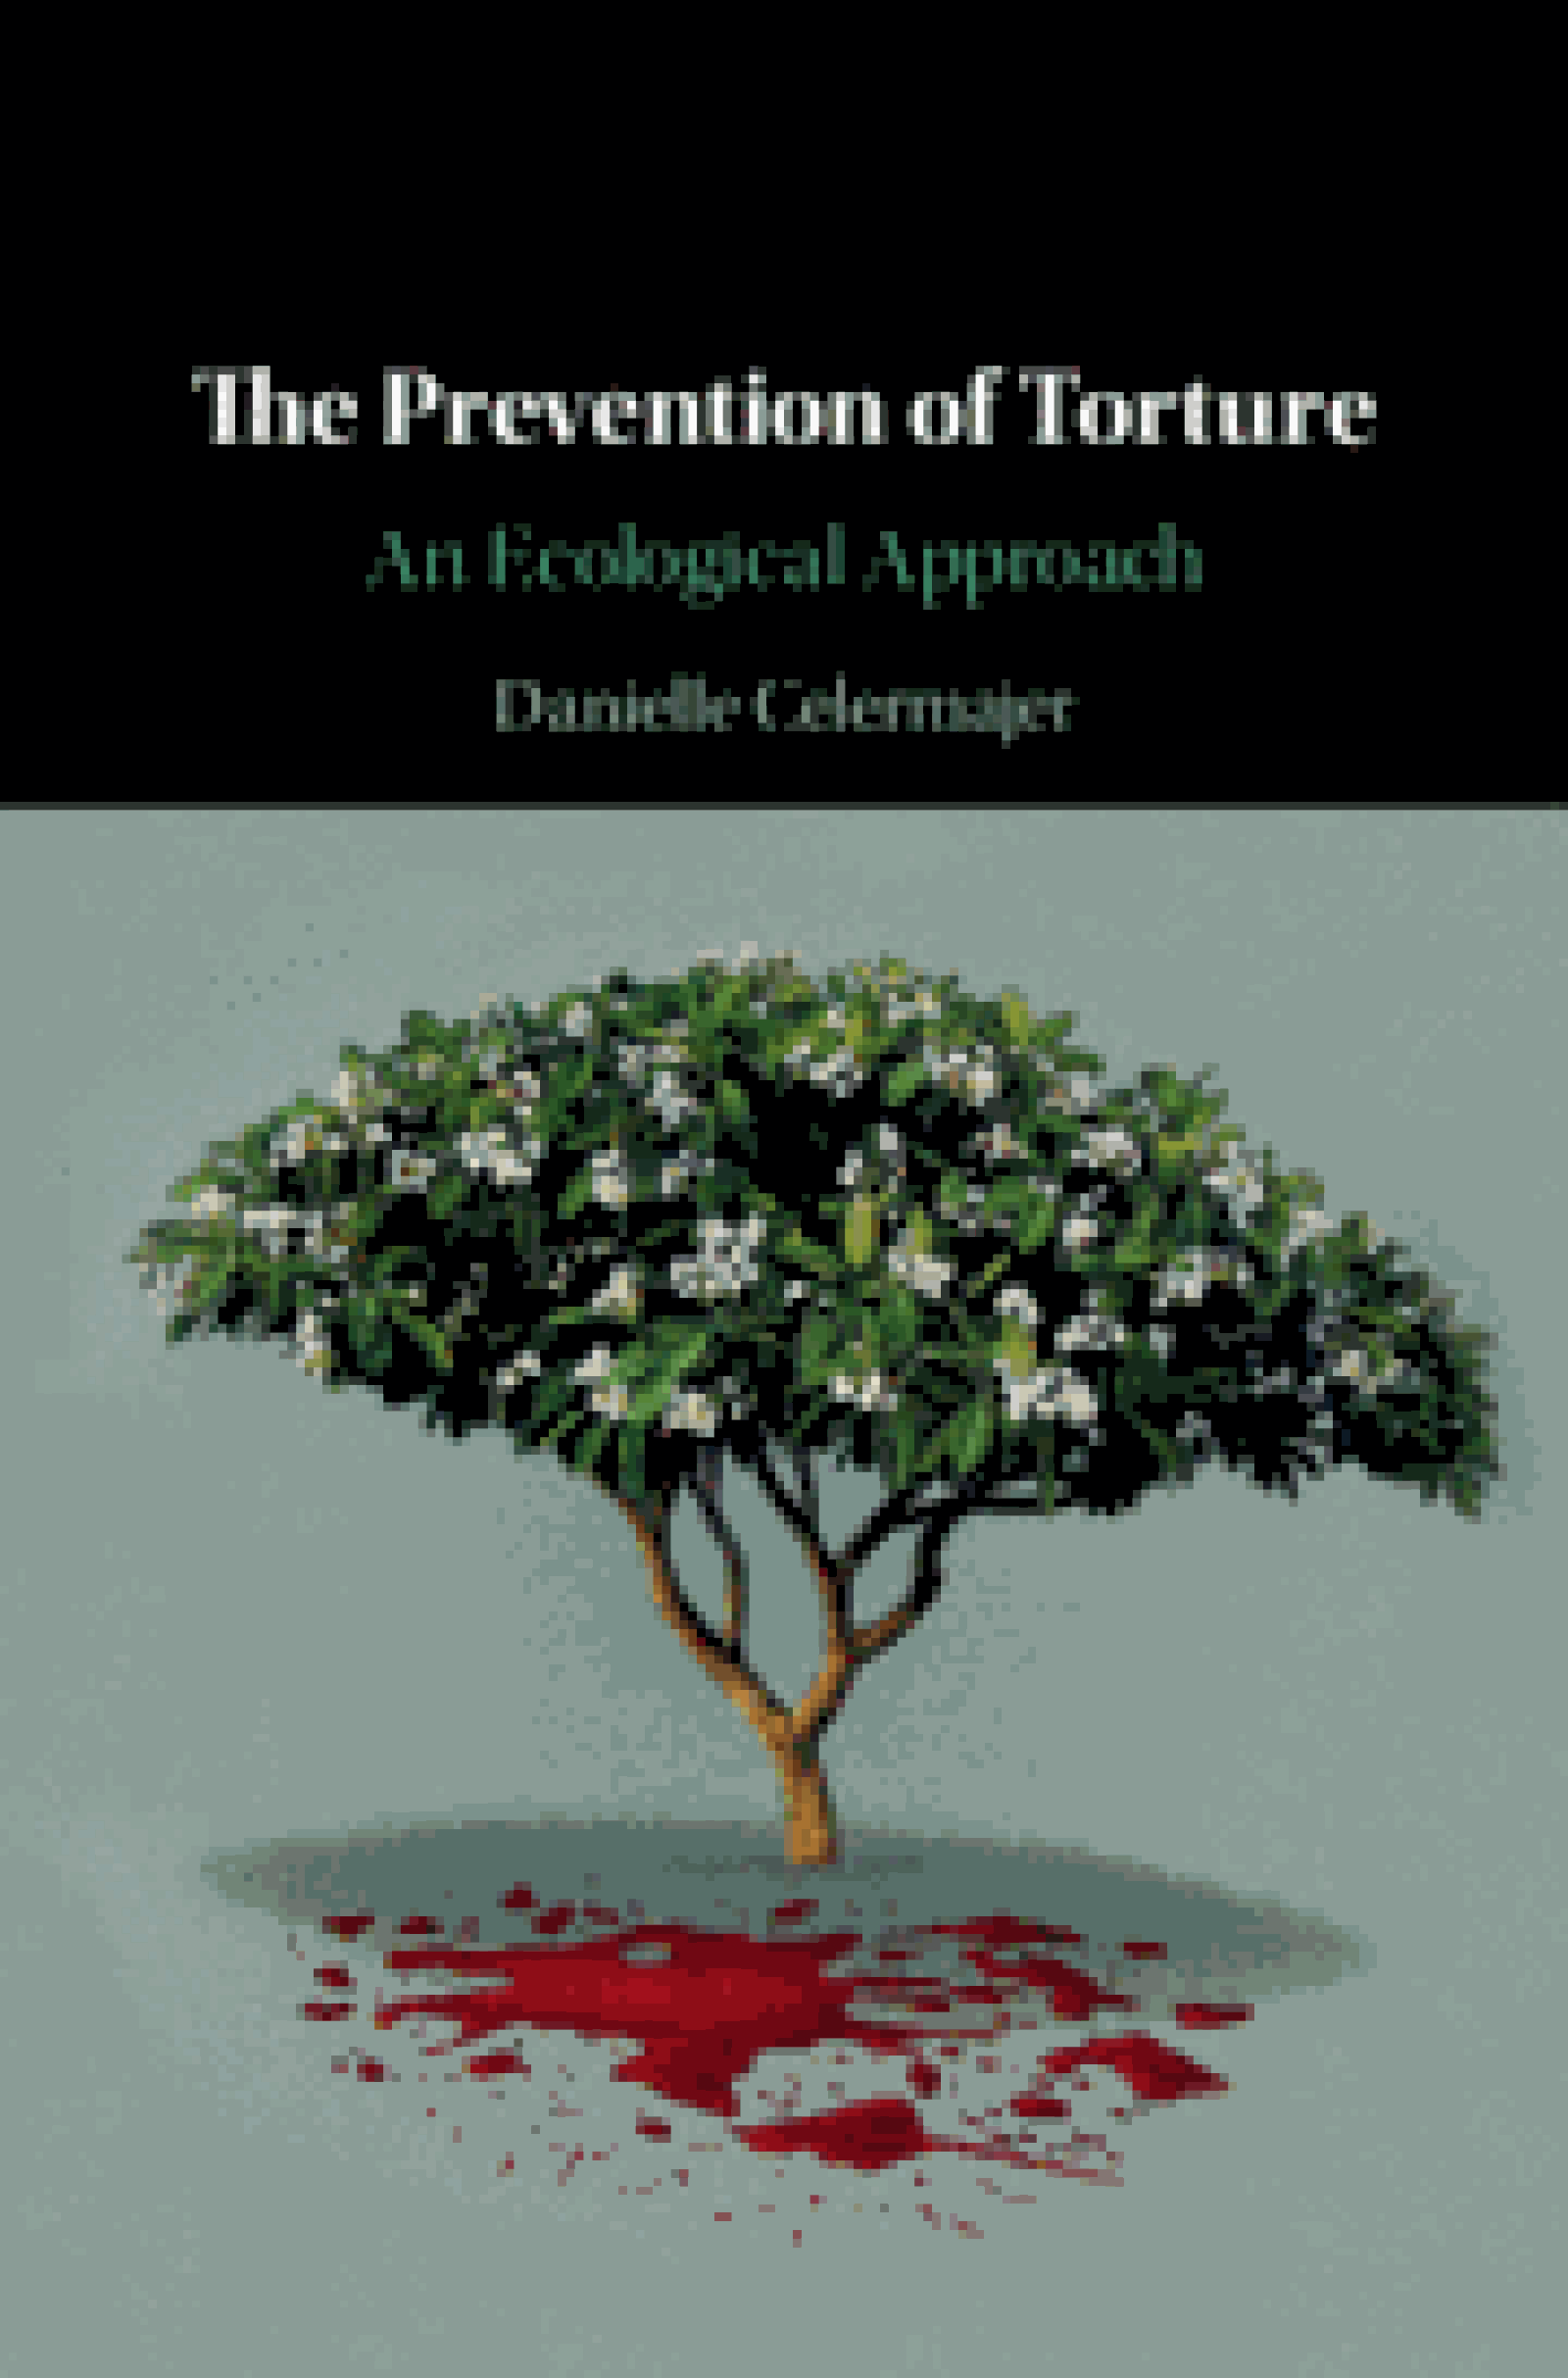 Cover of book: The Prevention of Torture – An Ecological Approach